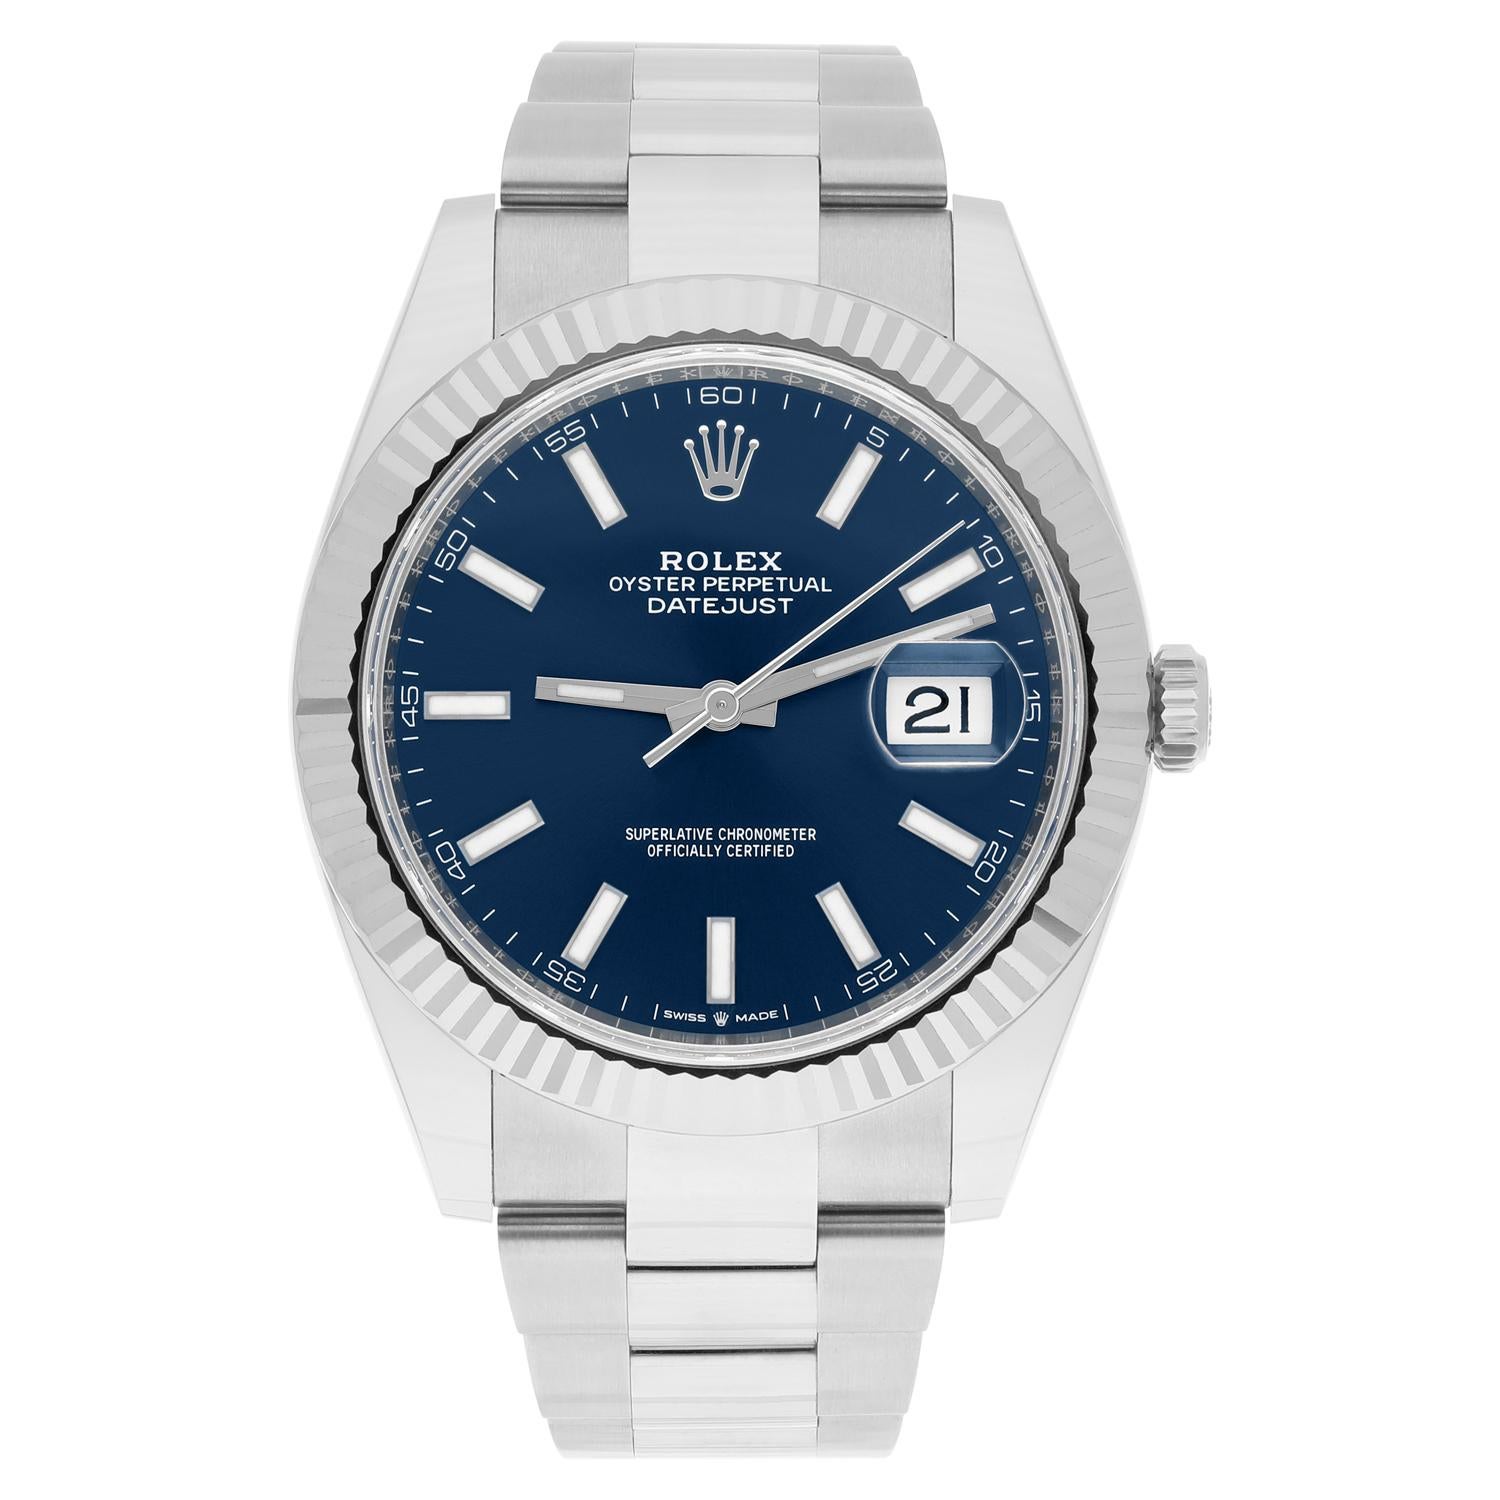 This magnificent Rolex Datejust wristwatch is a true masterpiece of Swiss craftsmanship. With its exquisite Blue Dial and elegant Index indicators, it is the epitome of luxury and style. The 41mm stainless steel case and fluted bezel in white gold